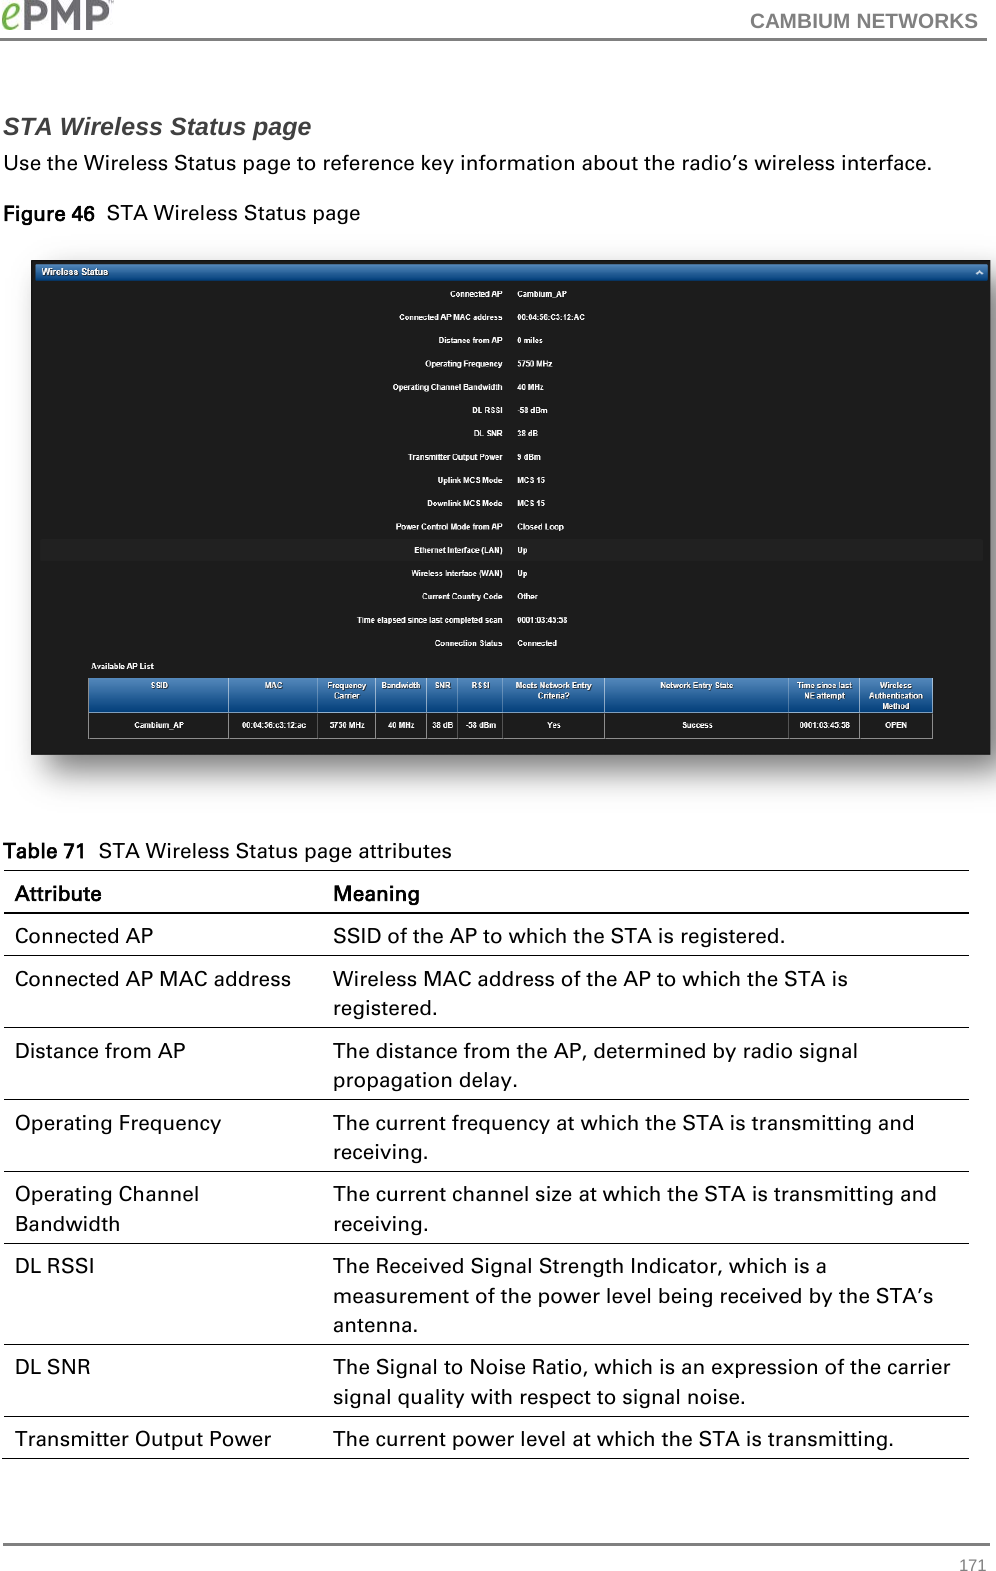 CAMBIUM NETWORKS  STA Wireless Status page Use the Wireless Status page to reference key information about the radio’s wireless interface. Figure 46  STA Wireless Status page  Table 71  STA Wireless Status page attributes Attribute Meaning Connected AP SSID of the AP to which the STA is registered. Connected AP MAC address Wireless MAC address of the AP to which the STA is registered. Distance from AP The distance from the AP, determined by radio signal propagation delay. Operating Frequency The current frequency at which the STA is transmitting and receiving. Operating Channel Bandwidth The current channel size at which the STA is transmitting and receiving. DL RSSI The Received Signal Strength Indicator, which is a measurement of the power level being received by the STA’s antenna. DL SNR The Signal to Noise Ratio, which is an expression of the carrier signal quality with respect to signal noise. Transmitter Output Power The current power level at which the STA is transmitting.  171 